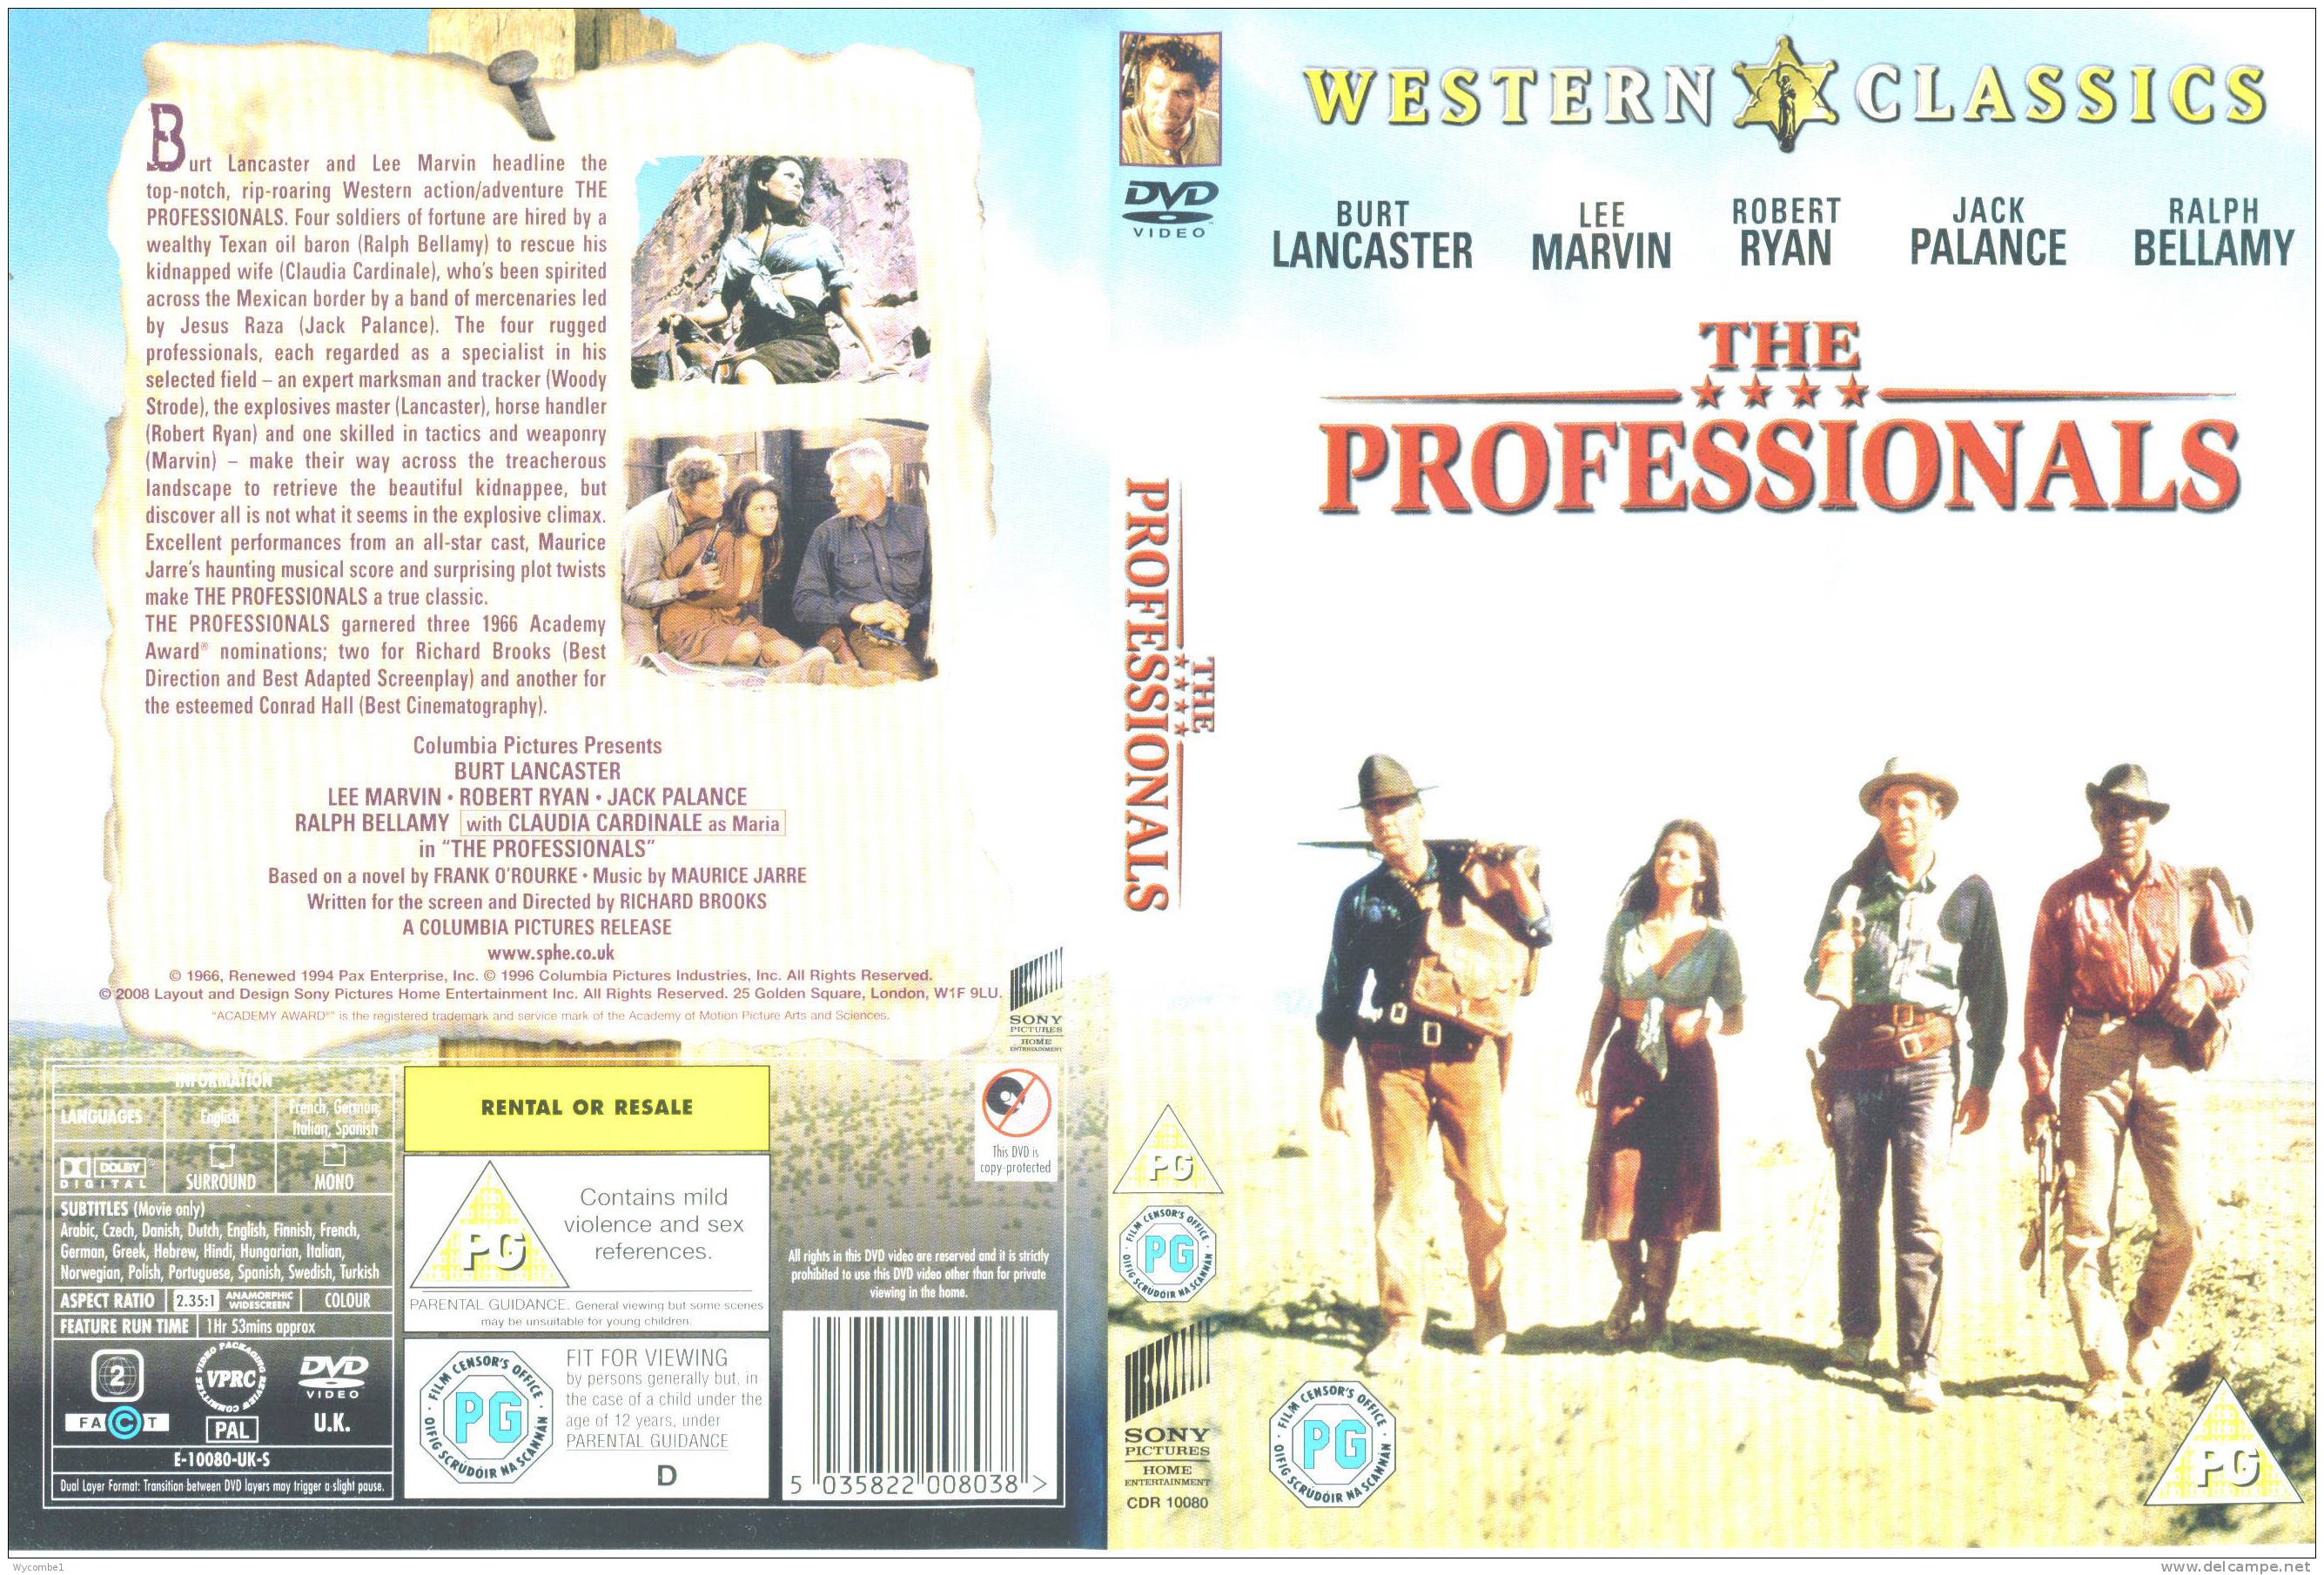 THE PROFESSIONALS - Lee Marvin (Details In Scan) - Oeste/Vaqueros